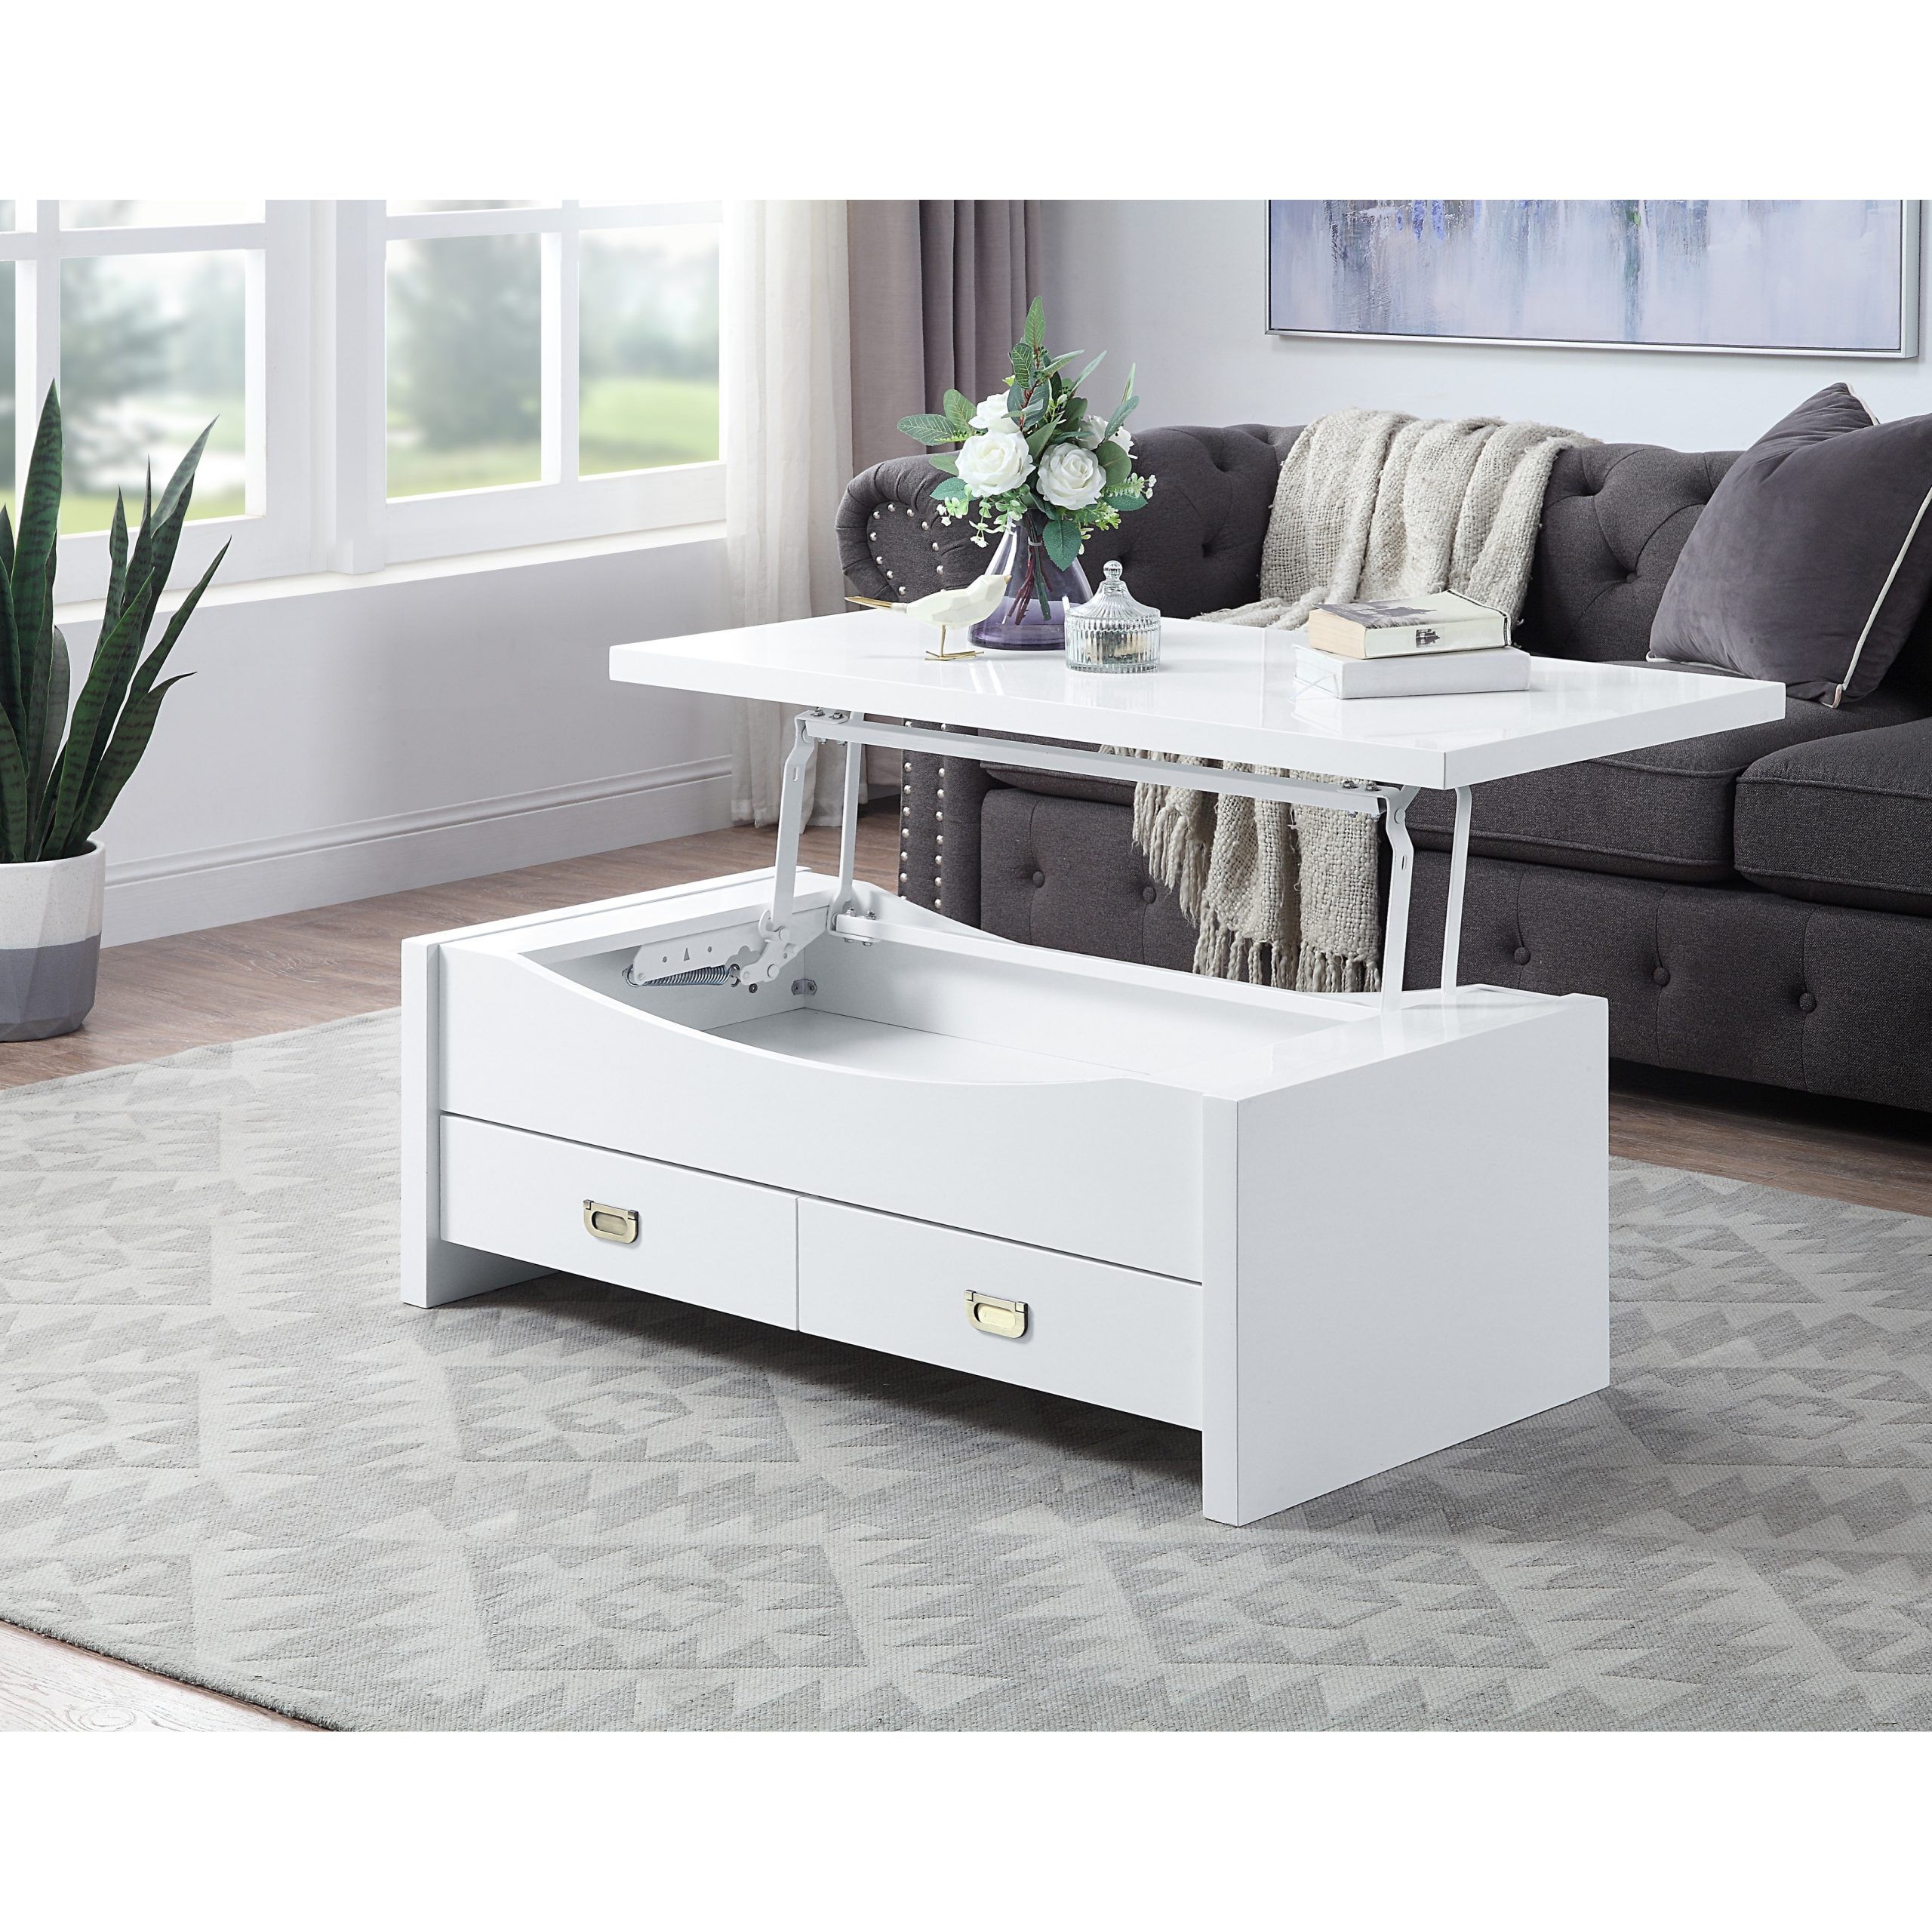 Aoolive Lift Top Coffee Table With Drawers In High Gloss White Finish – On  Sale – Bed Bath & Beyond – 35561340 For Fashionable High Gloss Lift Top Coffee Tables (View 10 of 10)